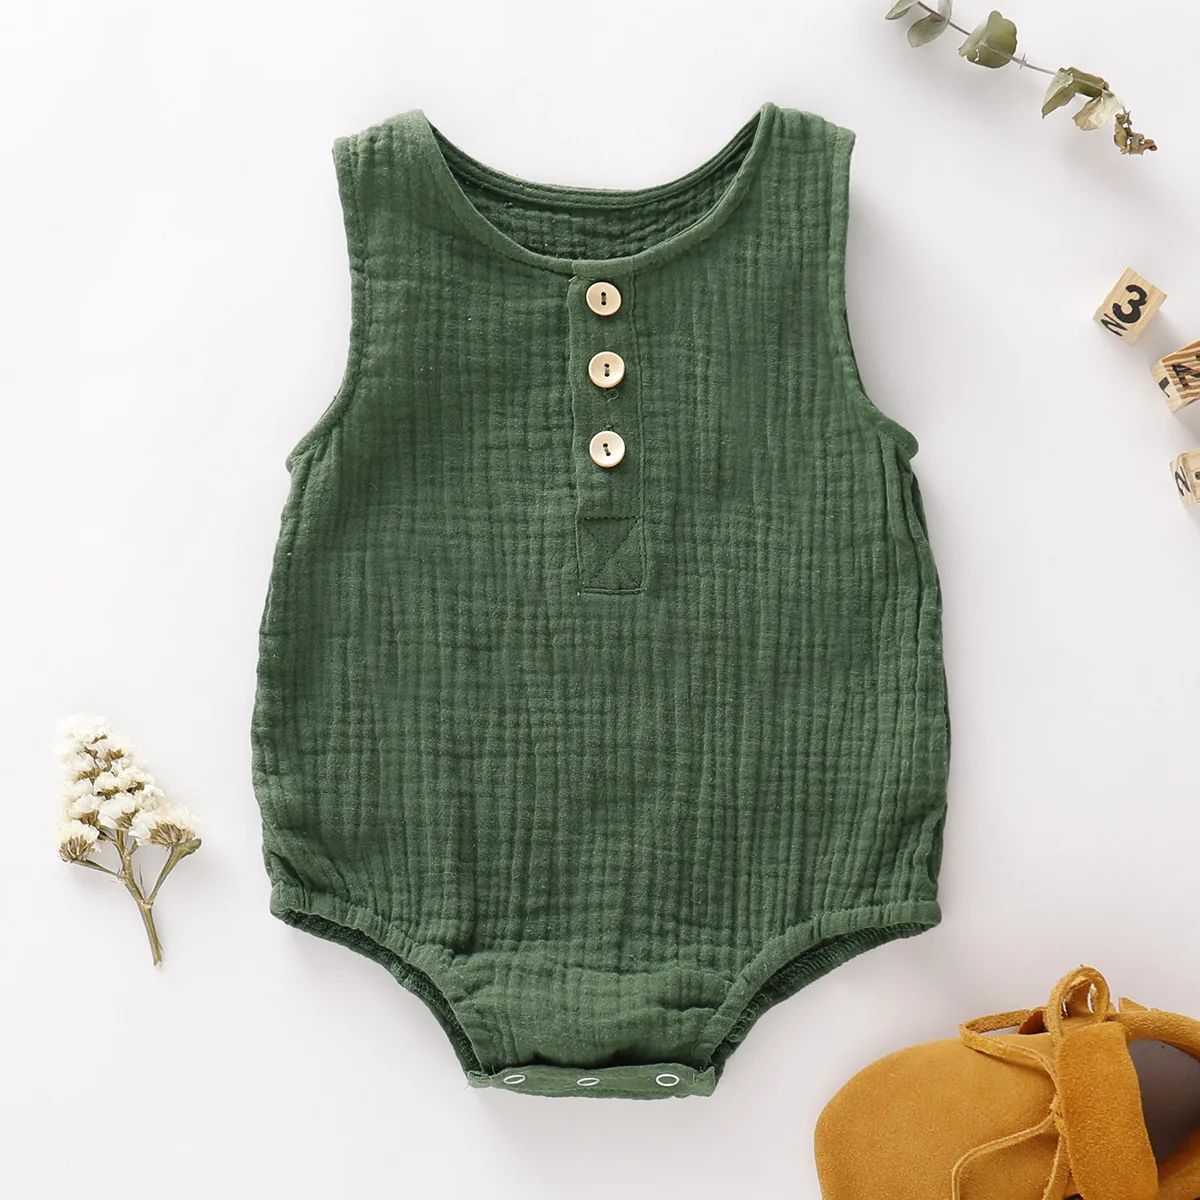 Bamboo fiber children's clothes Newborn Infant Baby Boys Girls Romper Playsuit Jumpsuit Linen Cotton Sleeveless Solid Baby Romper Clothes cool baby bodysuits	 Baby Rompers